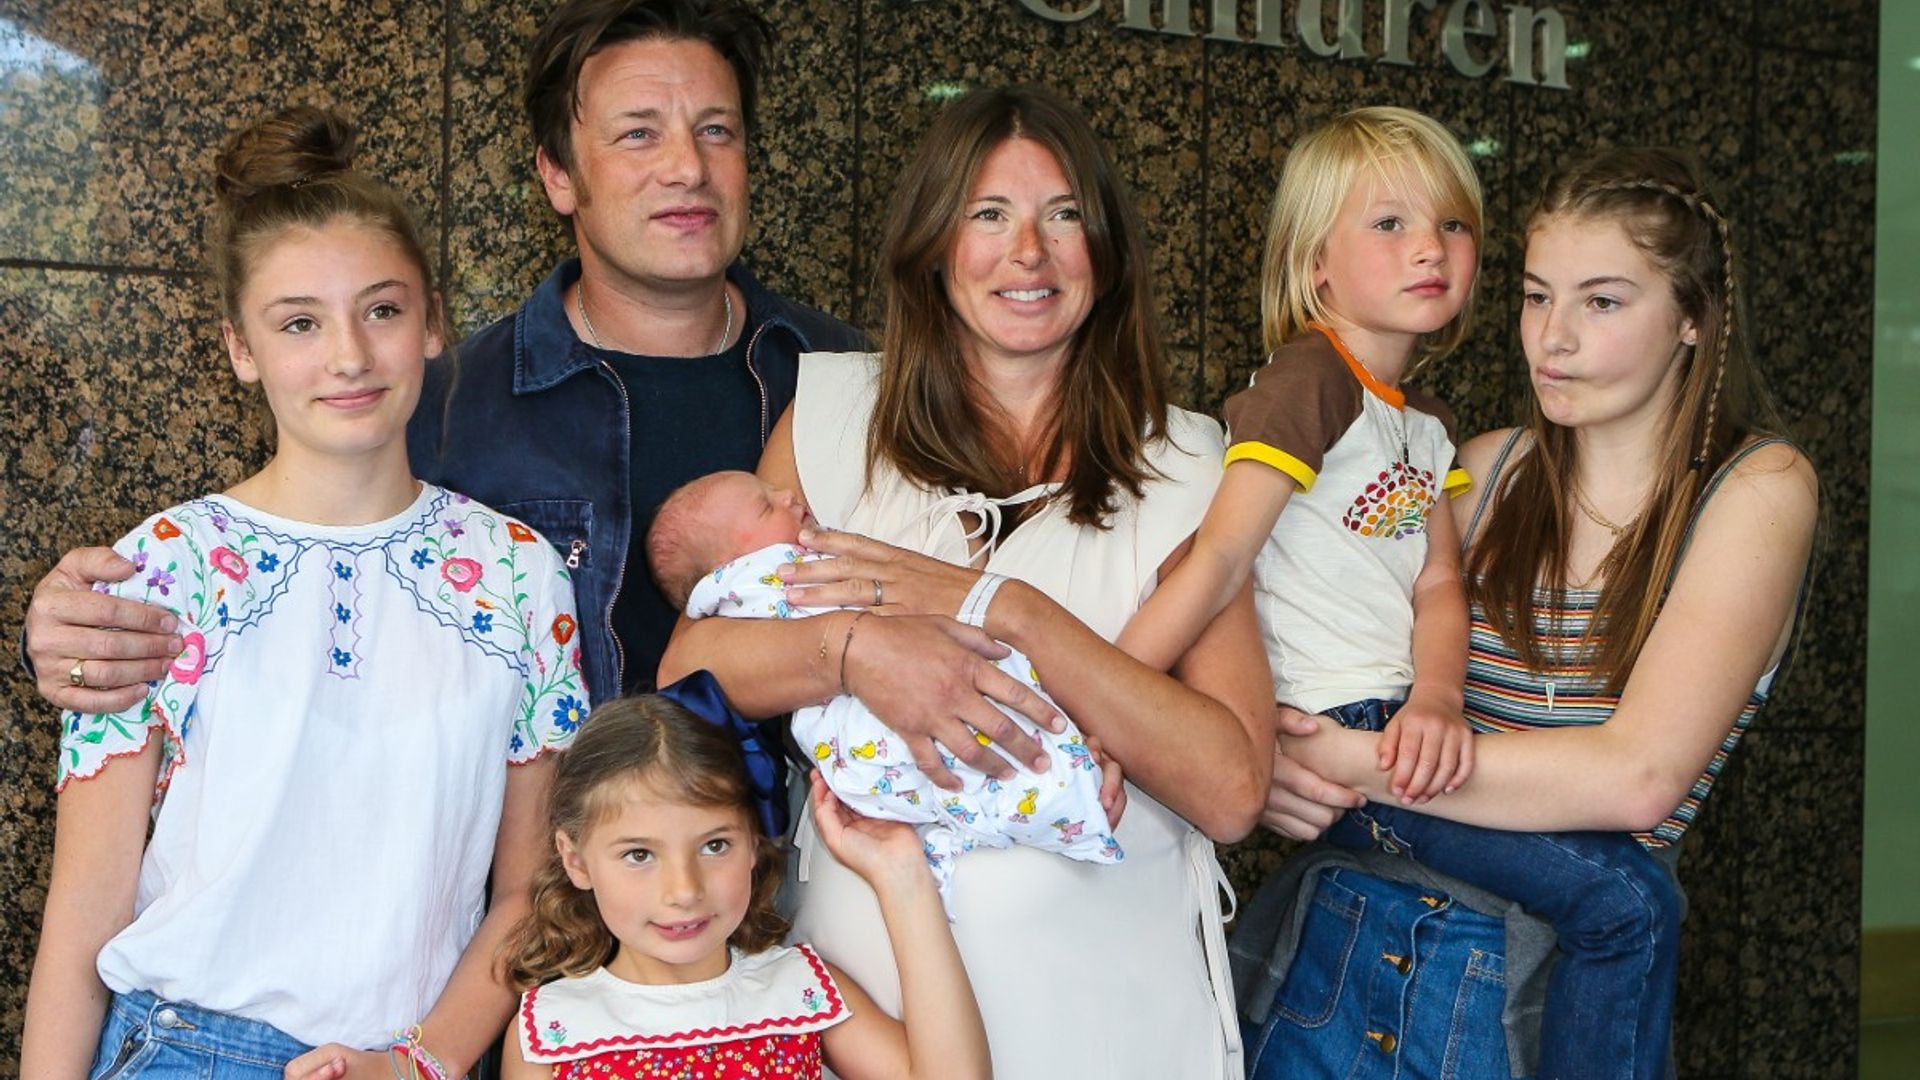 Jamie Oliver's wife Jools shares adorable birthday tribute to son Buddy - see photo